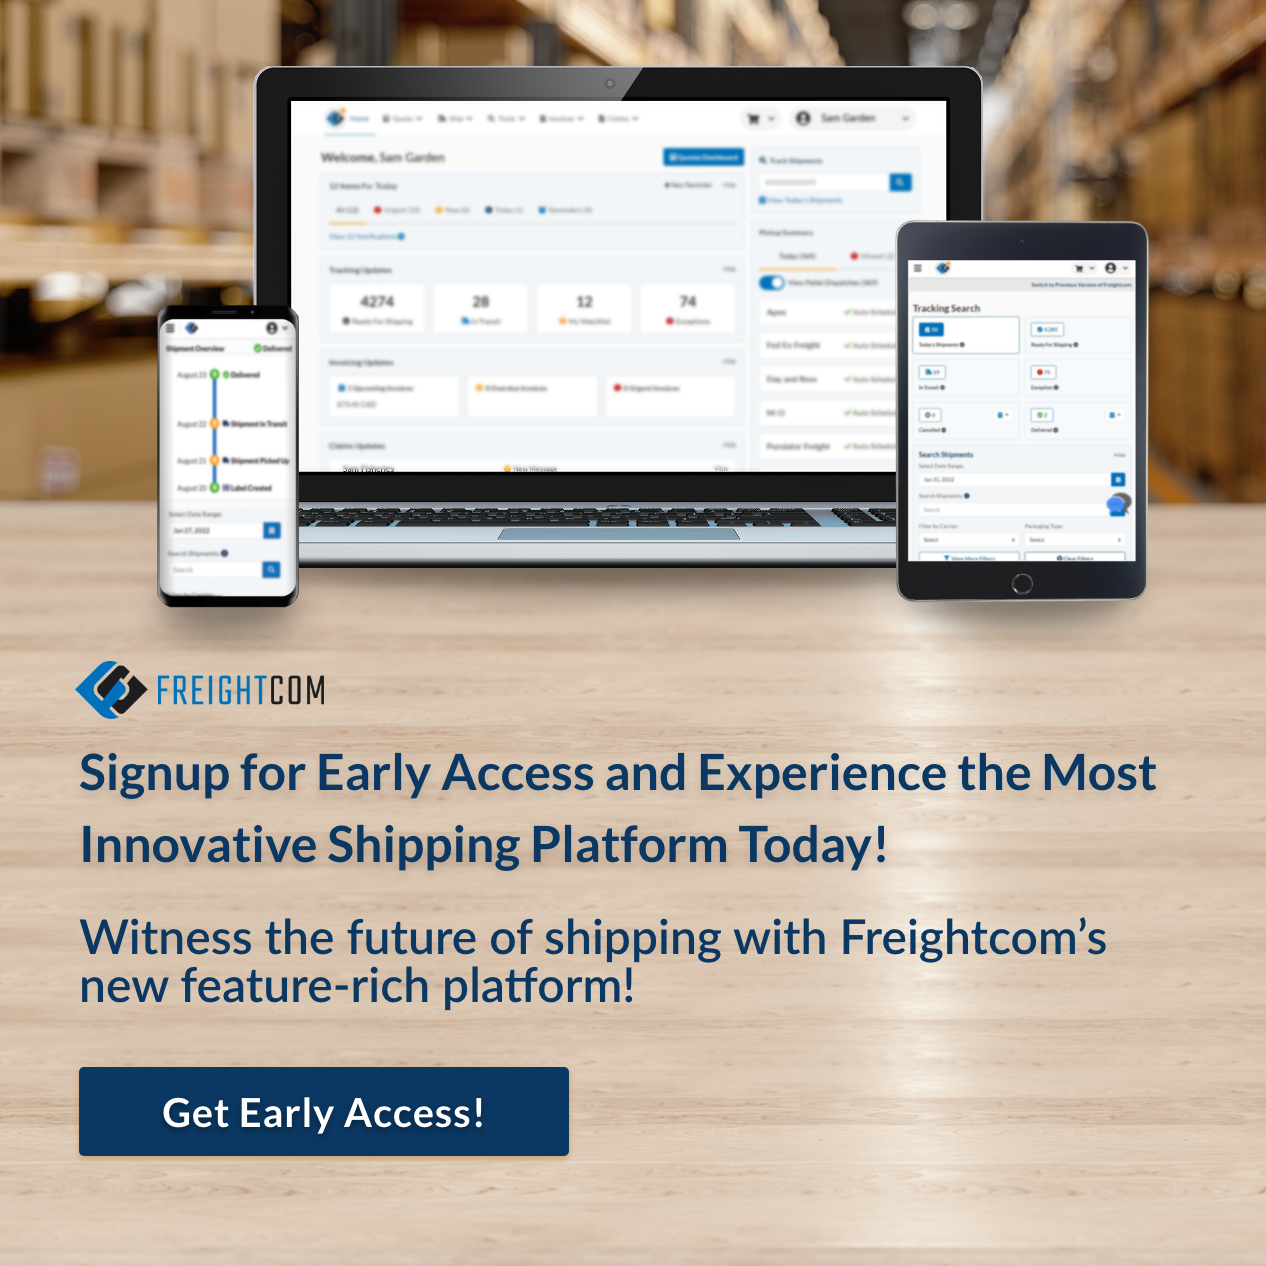 Sign Up for Freightcom Early Access